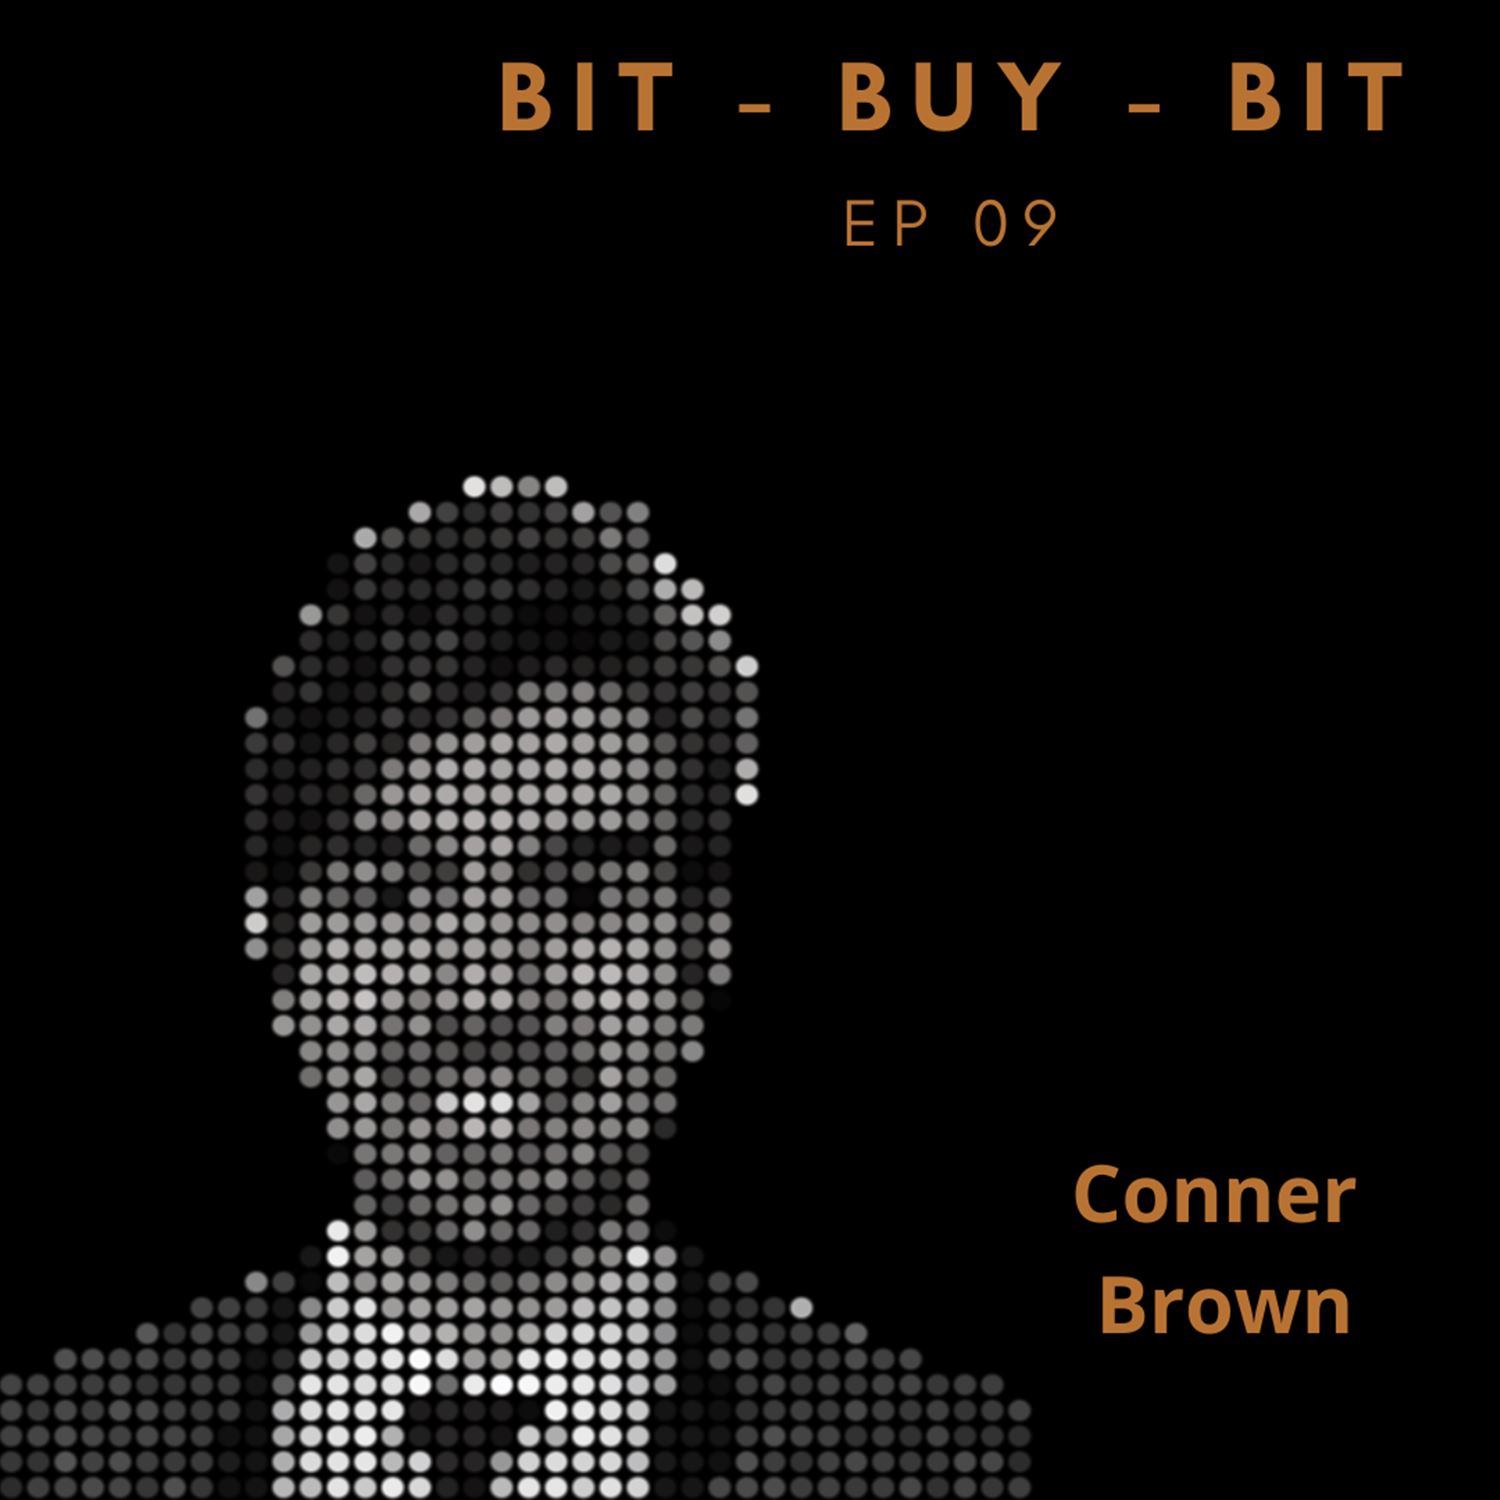 EP09 Bitcoin podcast with Conner Brown.